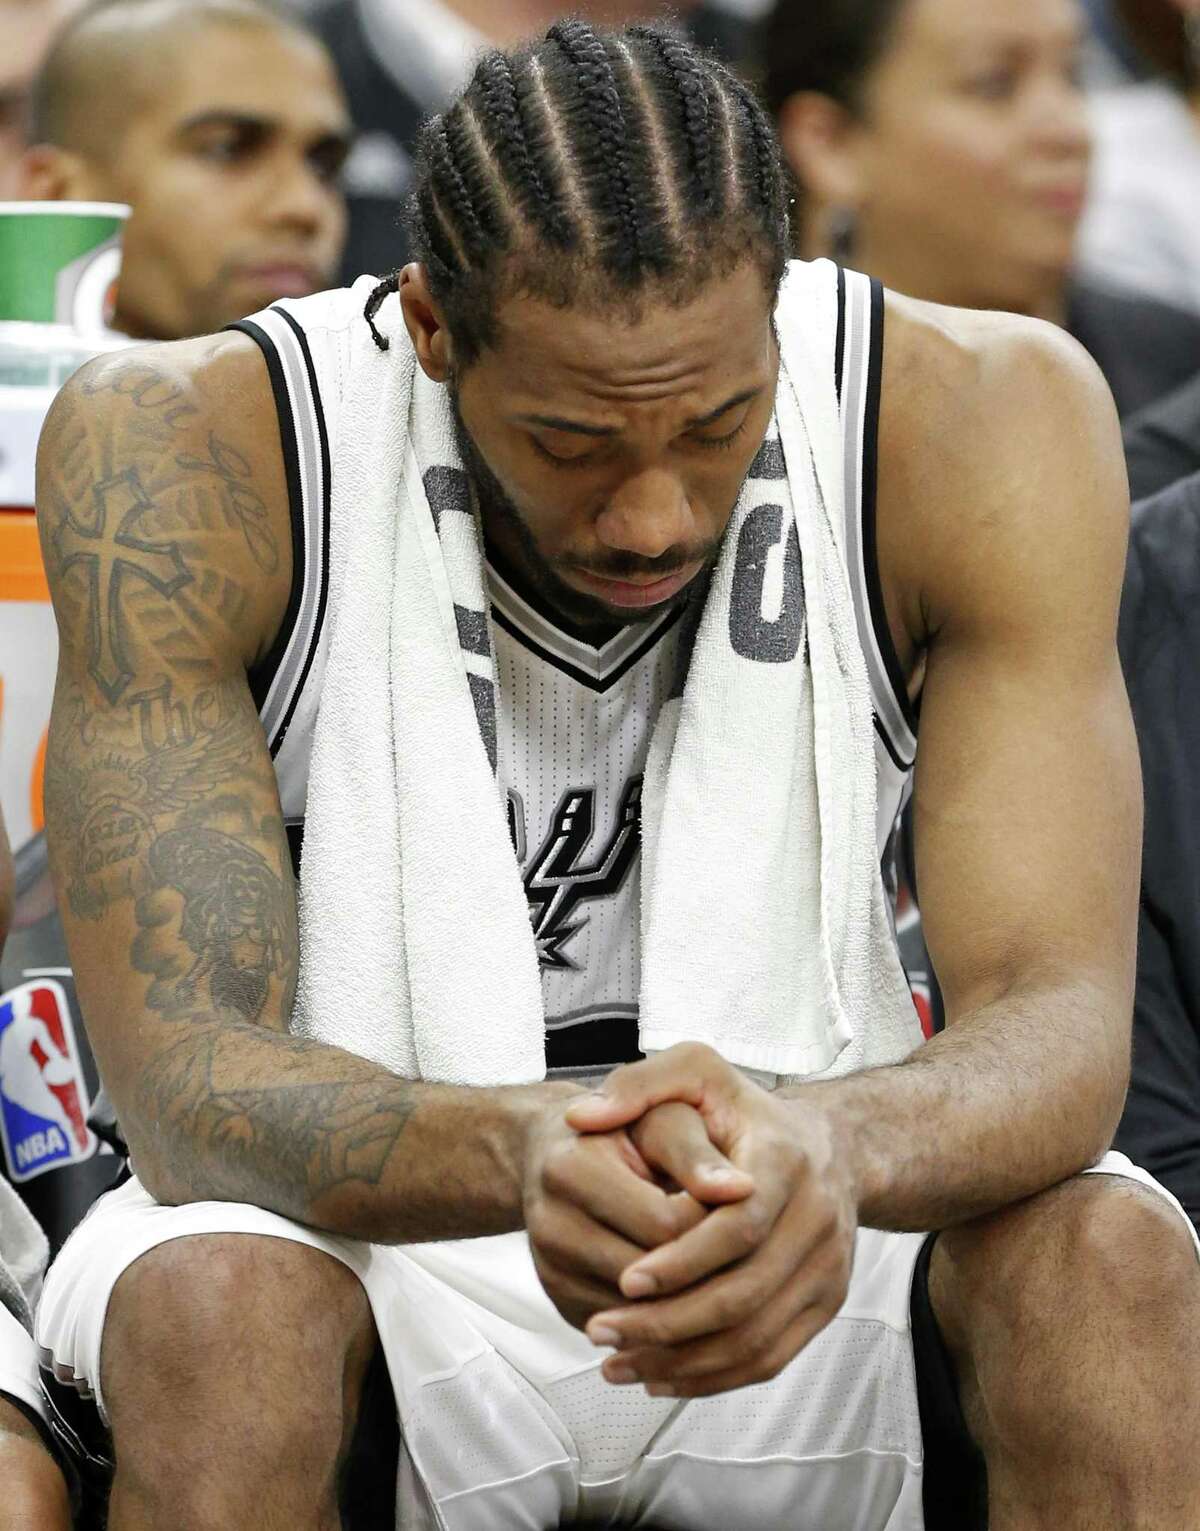 San Antonio Spurs' Kawhi Leonard sits dejected on the bench during second half action of Game 1 in the Western Conference semifinals against the Houston Rockets held Monday May 1, 2017 at the AT&T Center.